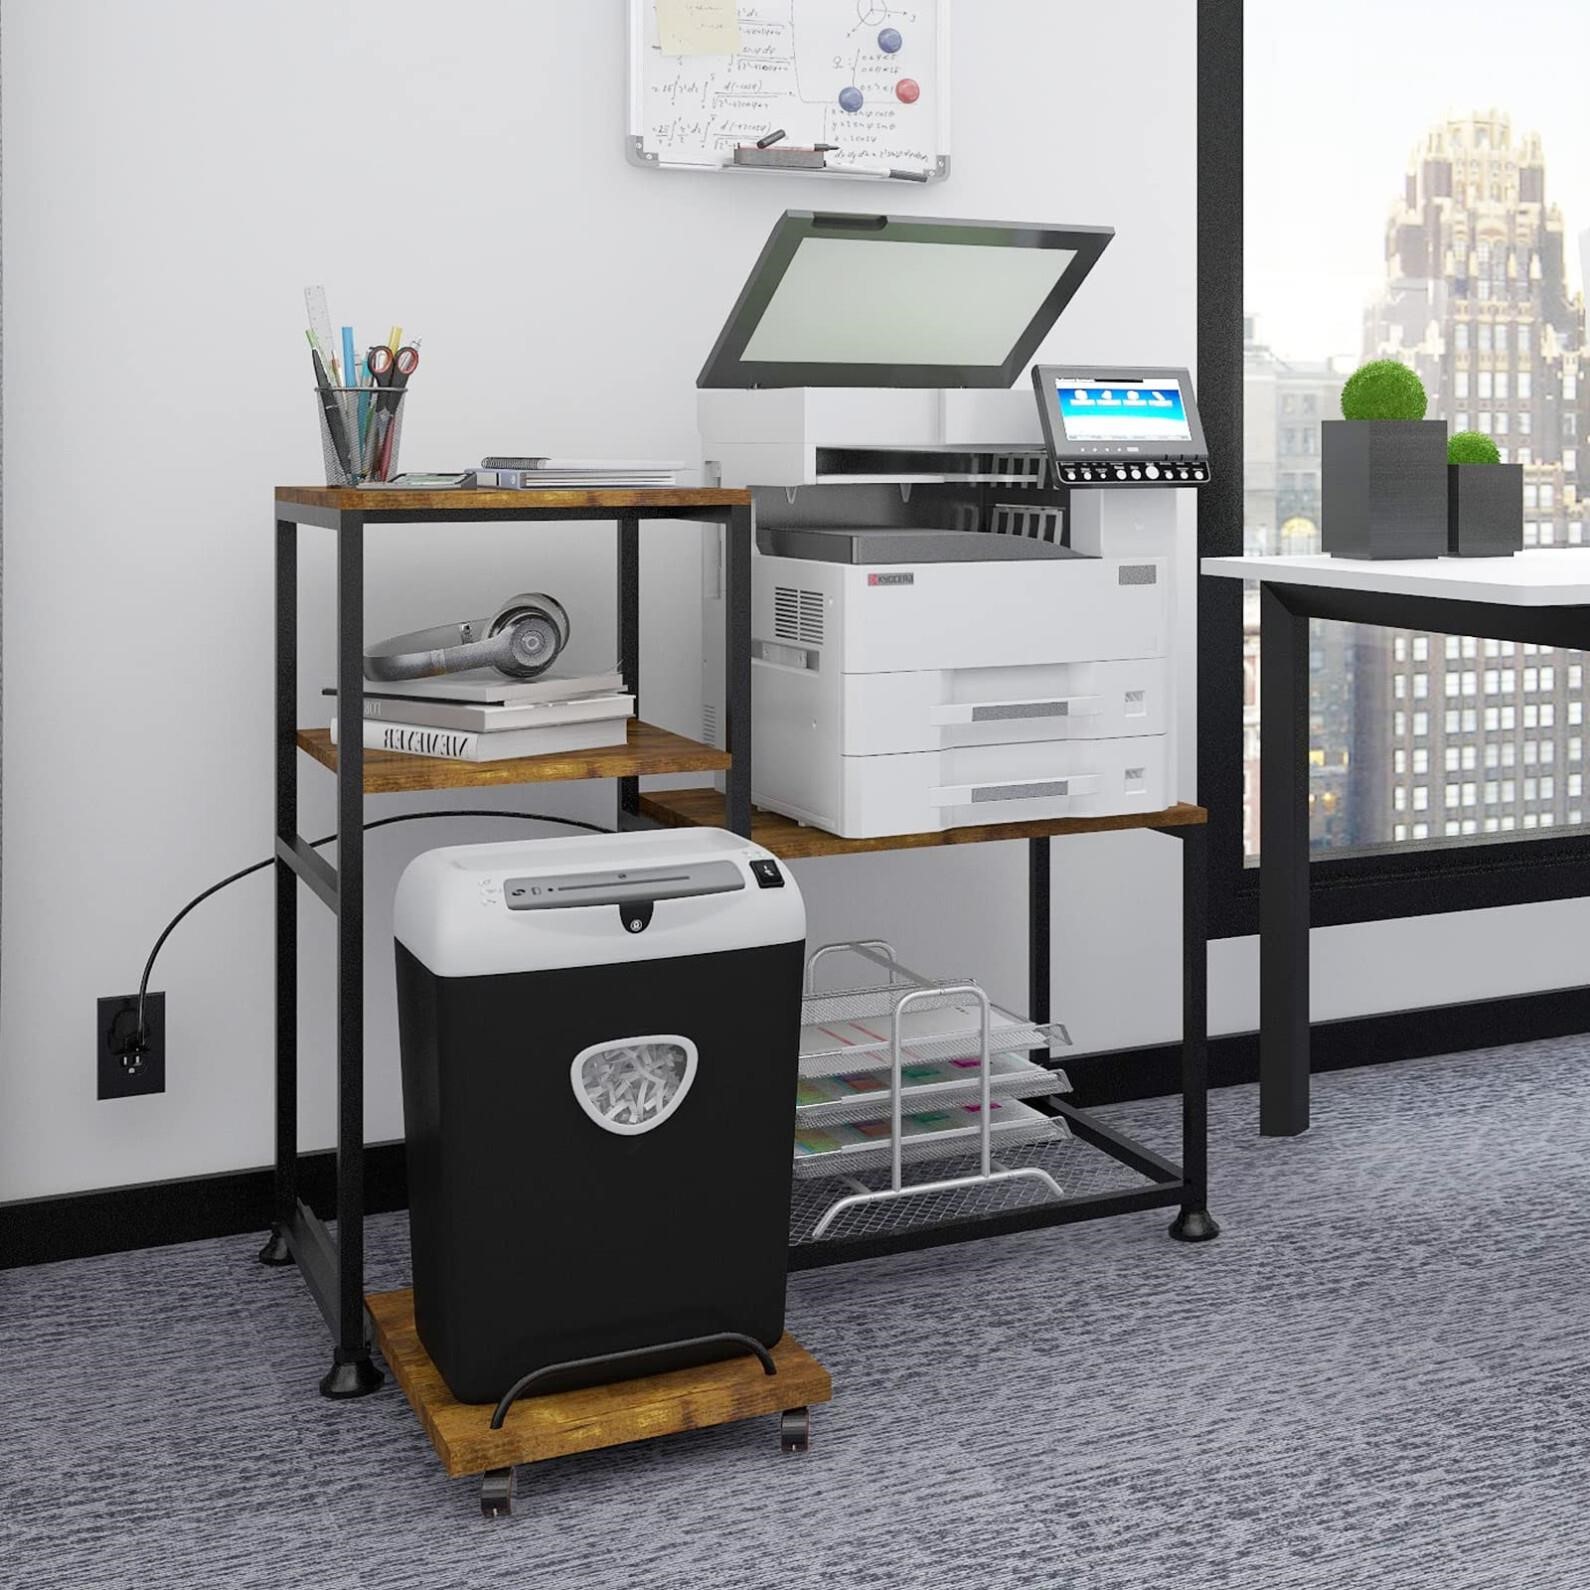 Natwind Printer and Shredder Stand with Power Outl